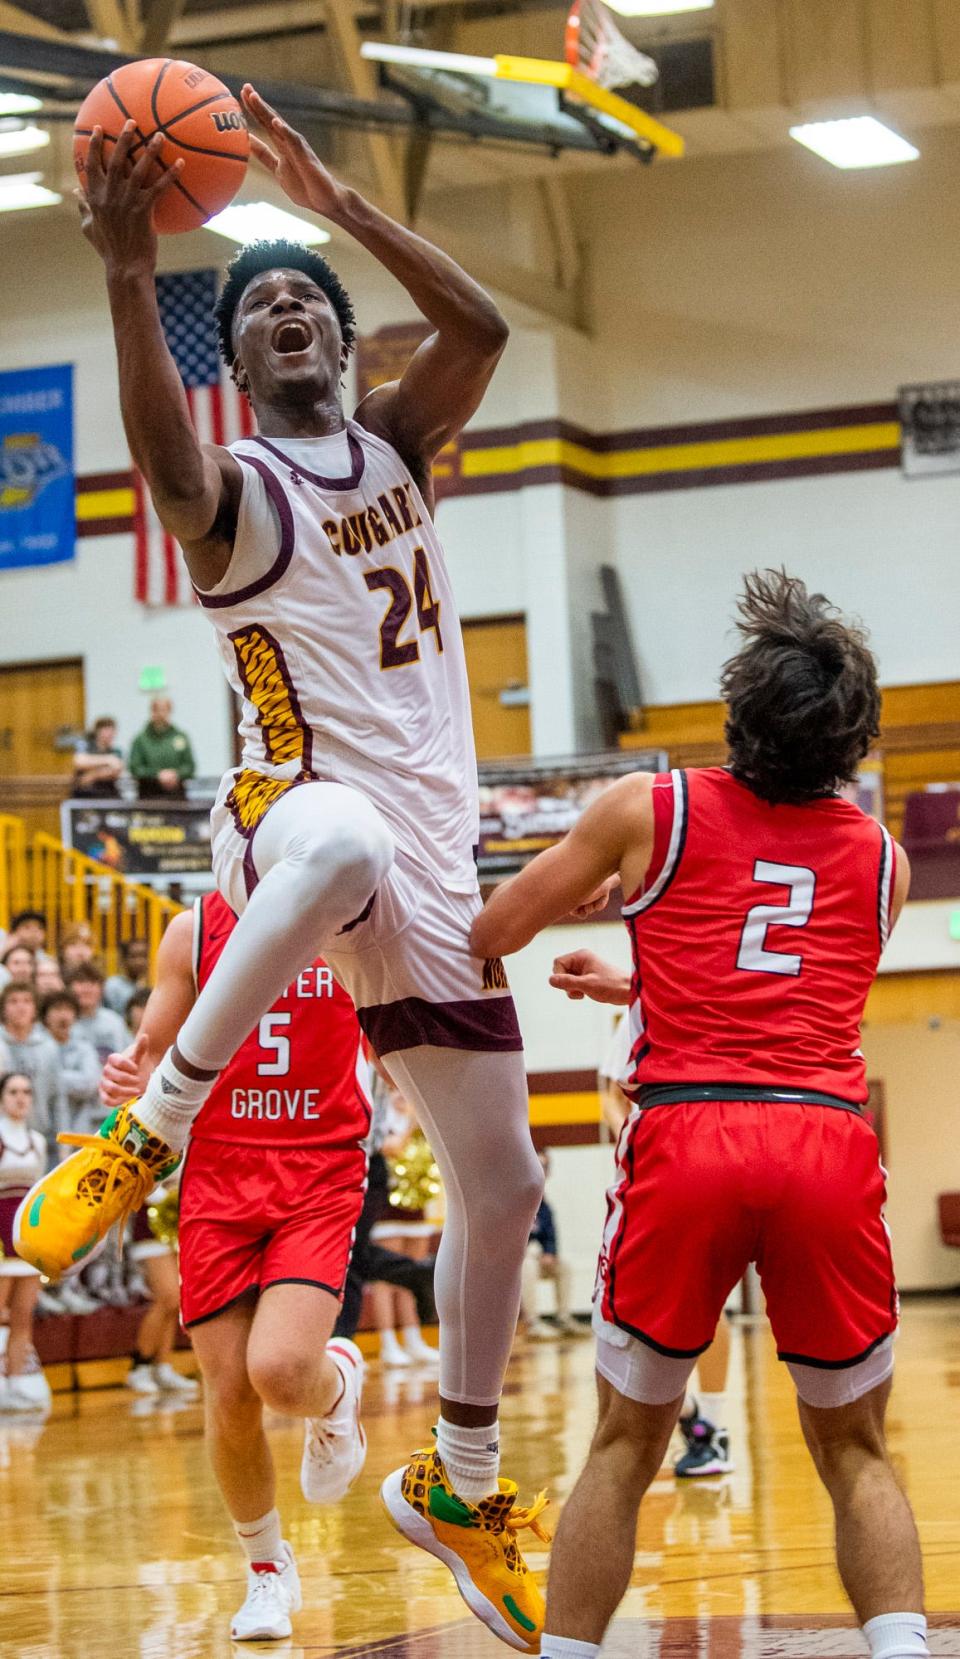 Bloomington North's JaQualon Roberts (24) shoots past Center Grove's Owen Baker (2) during the Bloomington North versus Center Grove boys basketball game at Bloomington High School North on Friday, Dec. 2, 2022.